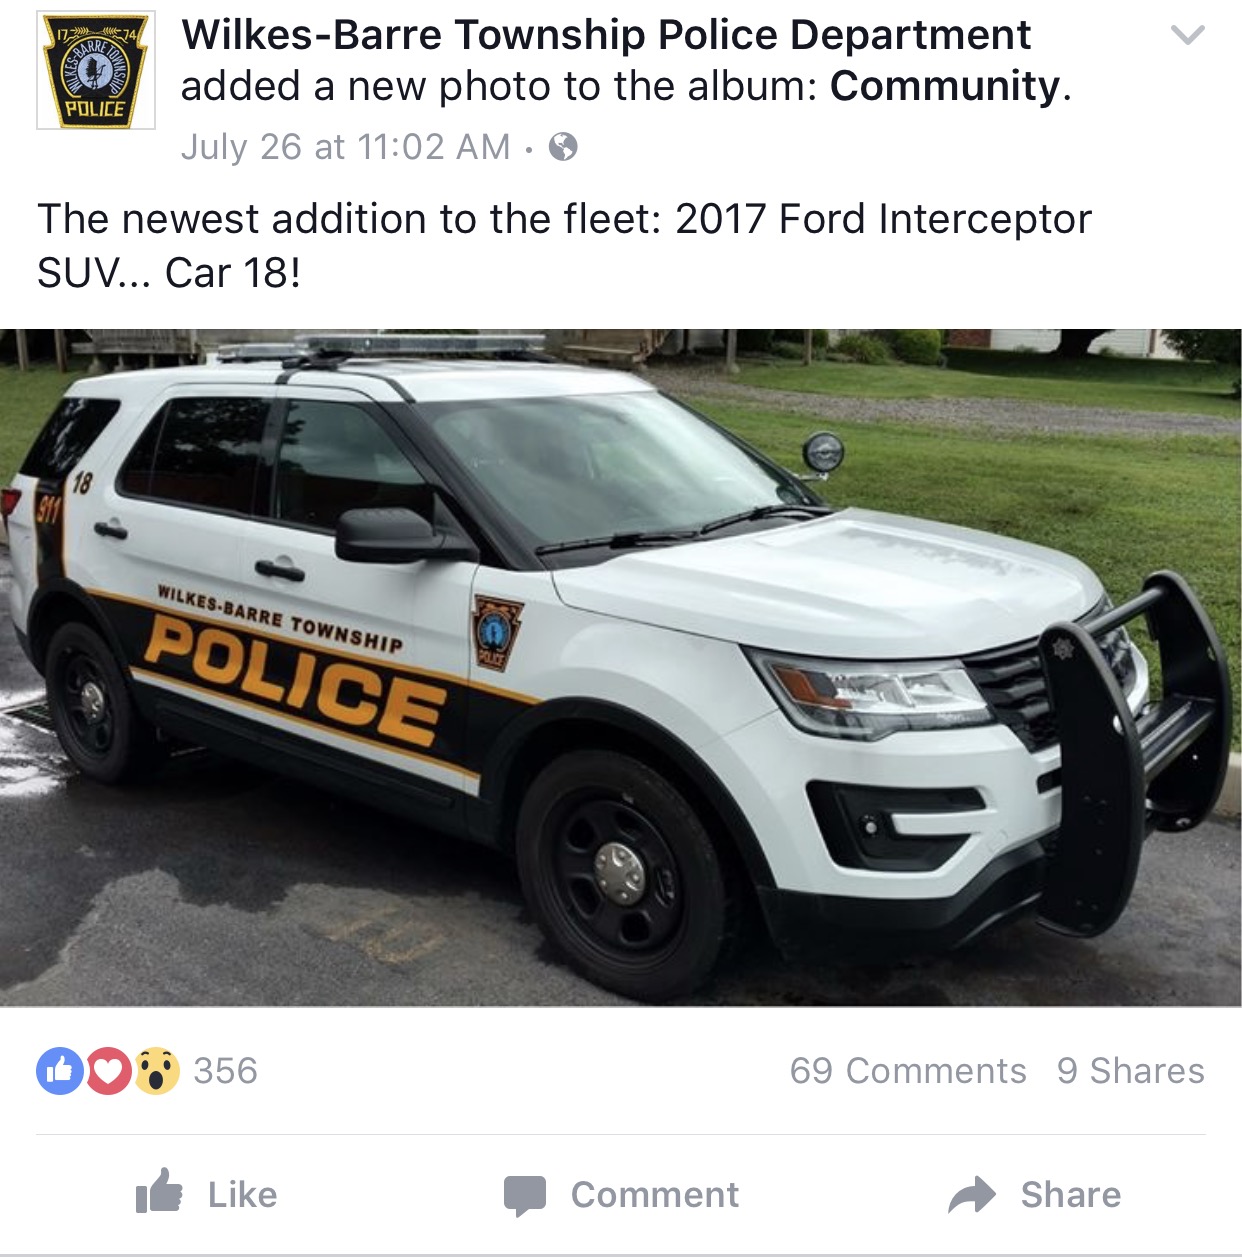 wilkes barre township police - 1774 Police WilkesBarre Township Police Department added a new photo to the album Community. July 26 at The newest addition to the fleet 2017 Ford Interceptor Suv... Car 18! WilkesBarre Township Police 00 356 69 9 It Comment